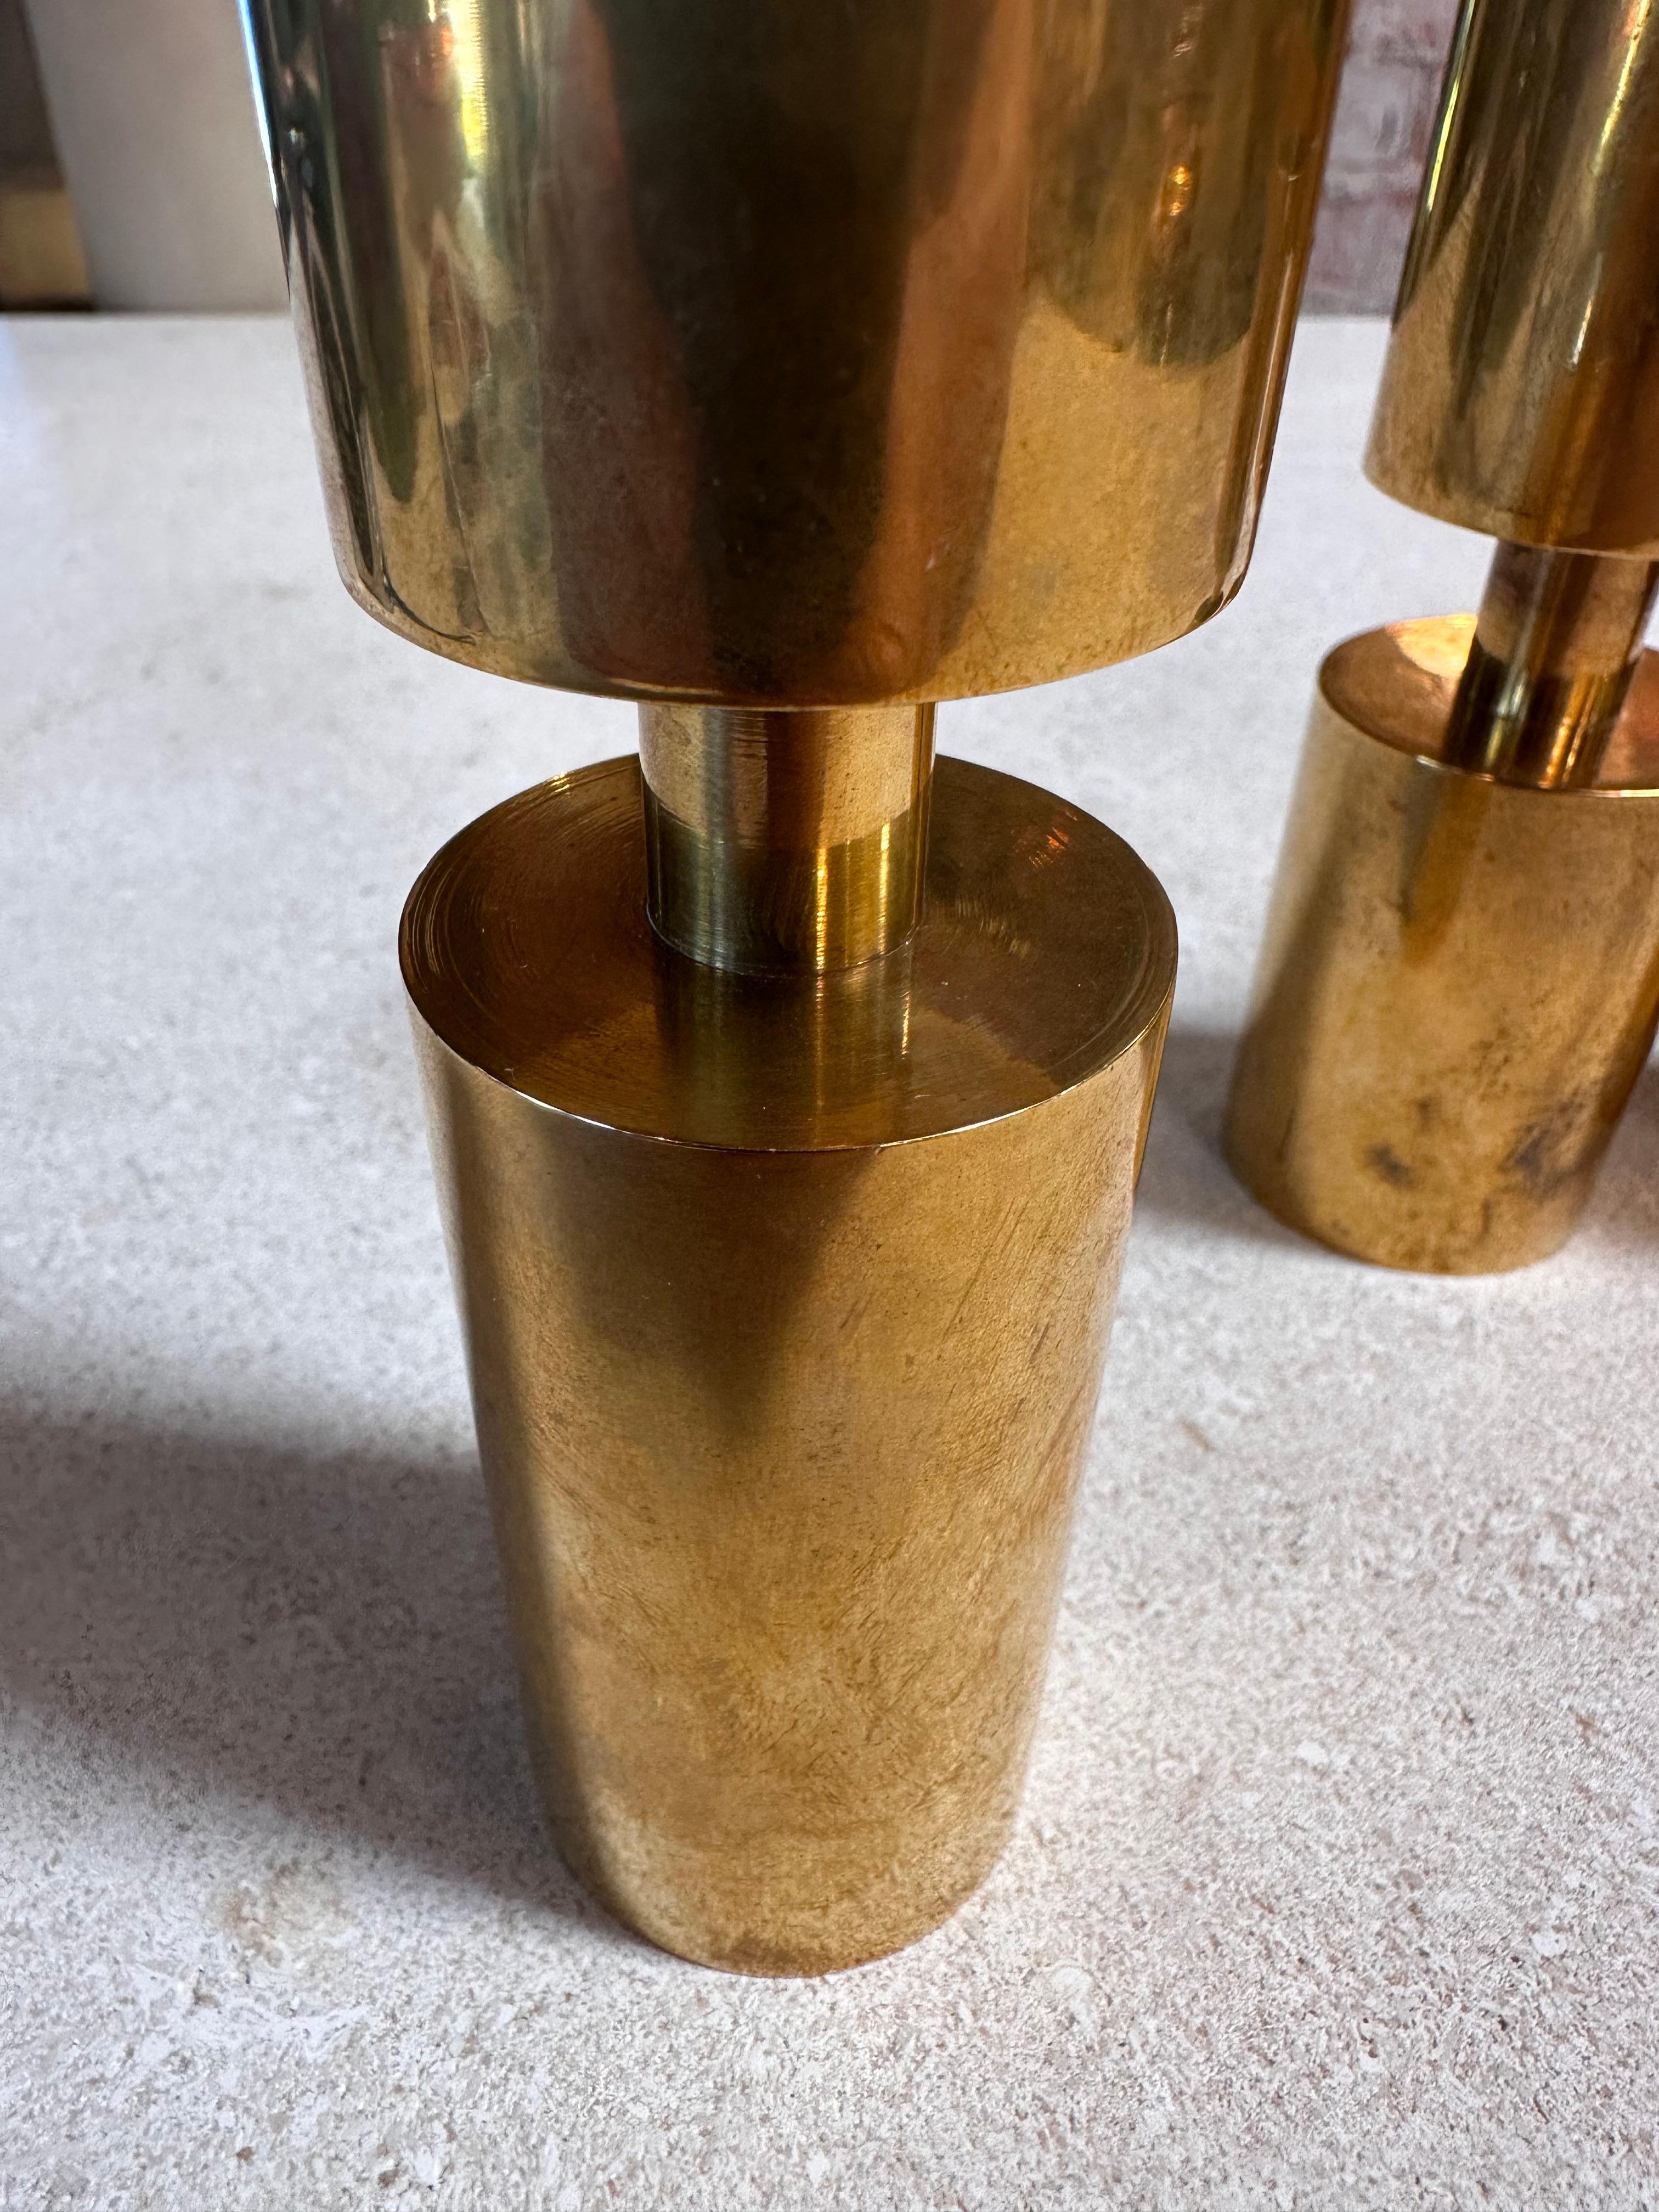 Mid-Century Modern Set of 3 Brass Candle Holders by Thelma Zoéga for Zoégas Kaffe 1970s